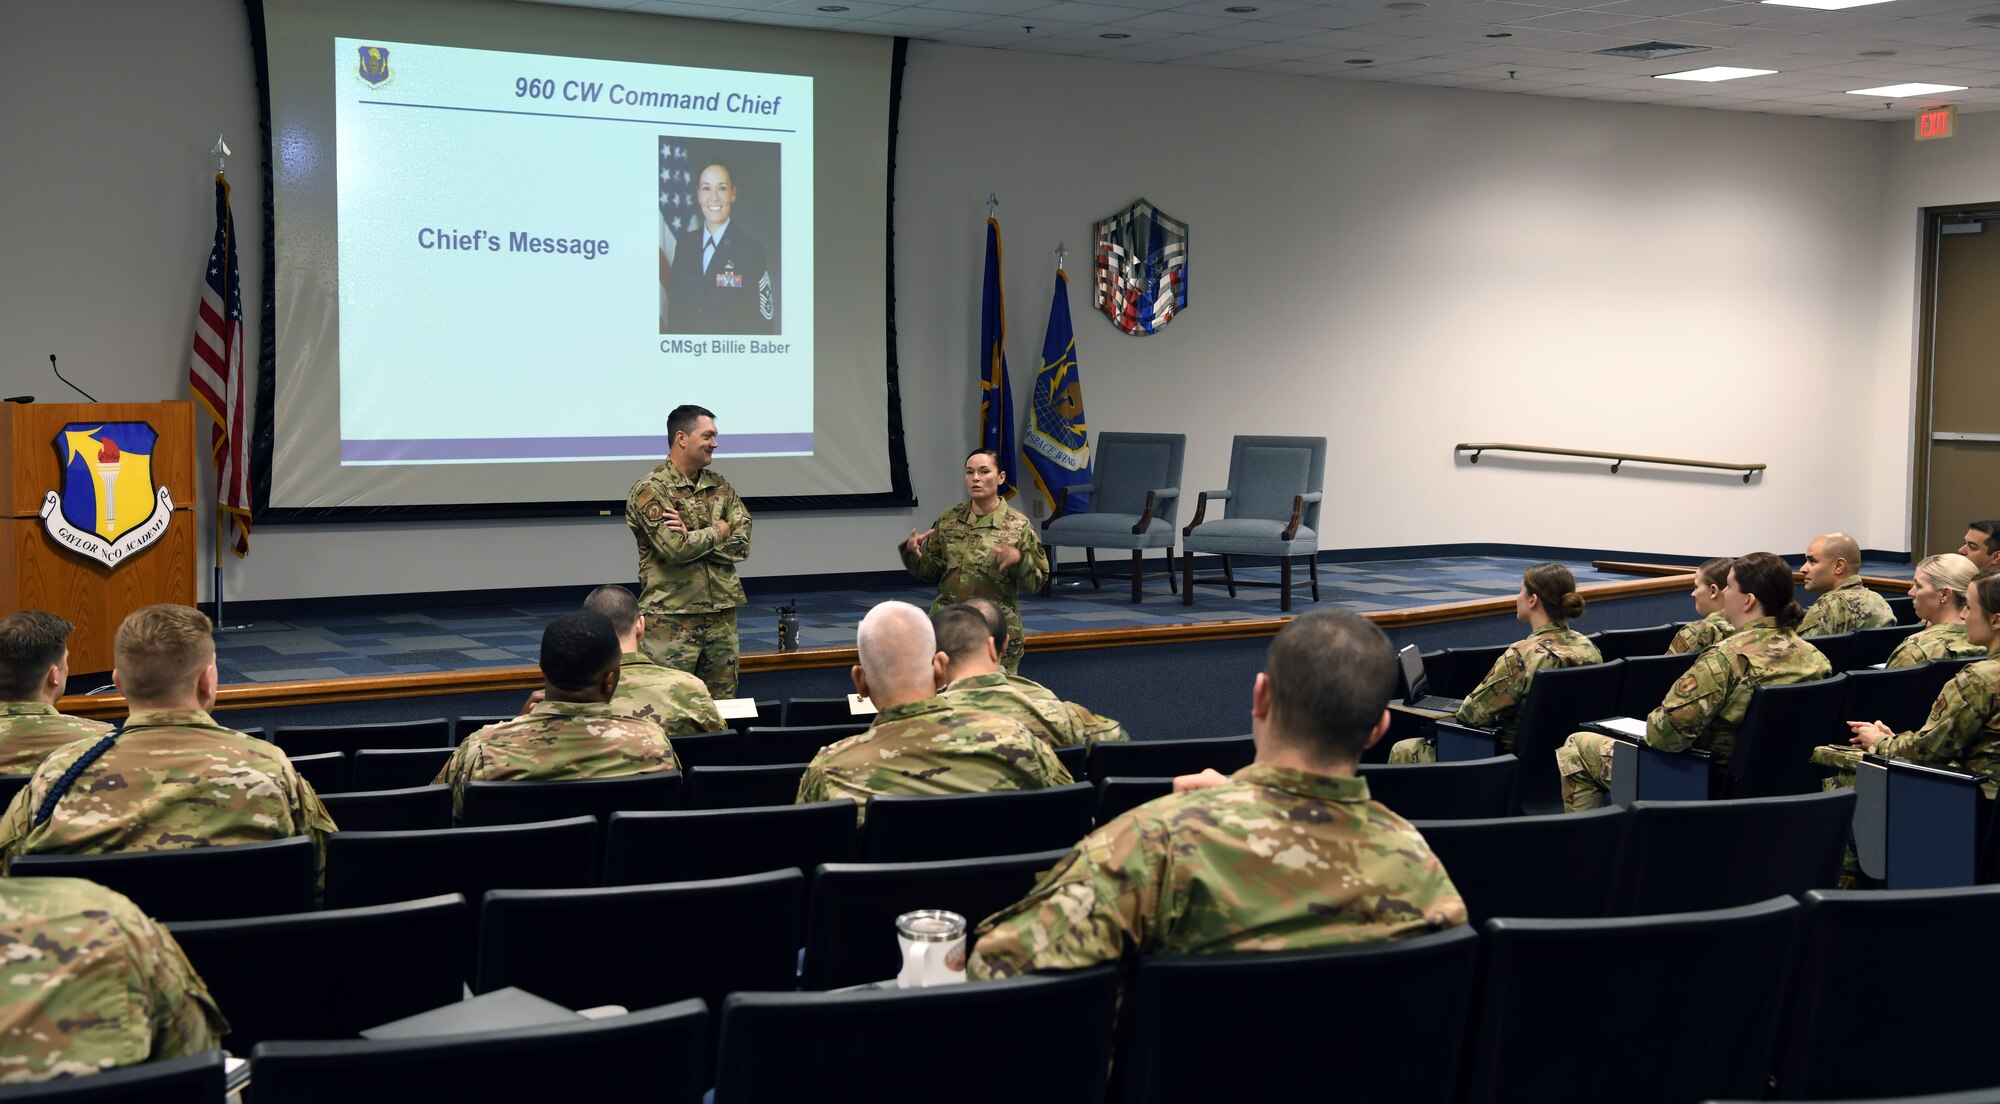 Col. Richard Erredge, 960th Cyberspace Wing commander, and Chief Master Sgt. Billie Baber, 960th CW command chief, speak during the opening session of the inaugural 960th CW Additional-Duty First Sergeants’ Symposium March 7, 2022, at Joint Base San Antonio-Lackland, Texas. The symposium provided training and networking opportunities to more than 55 Reserve, Guard and active-duty members. (U.S. Air Force photo by Kristian Carter)